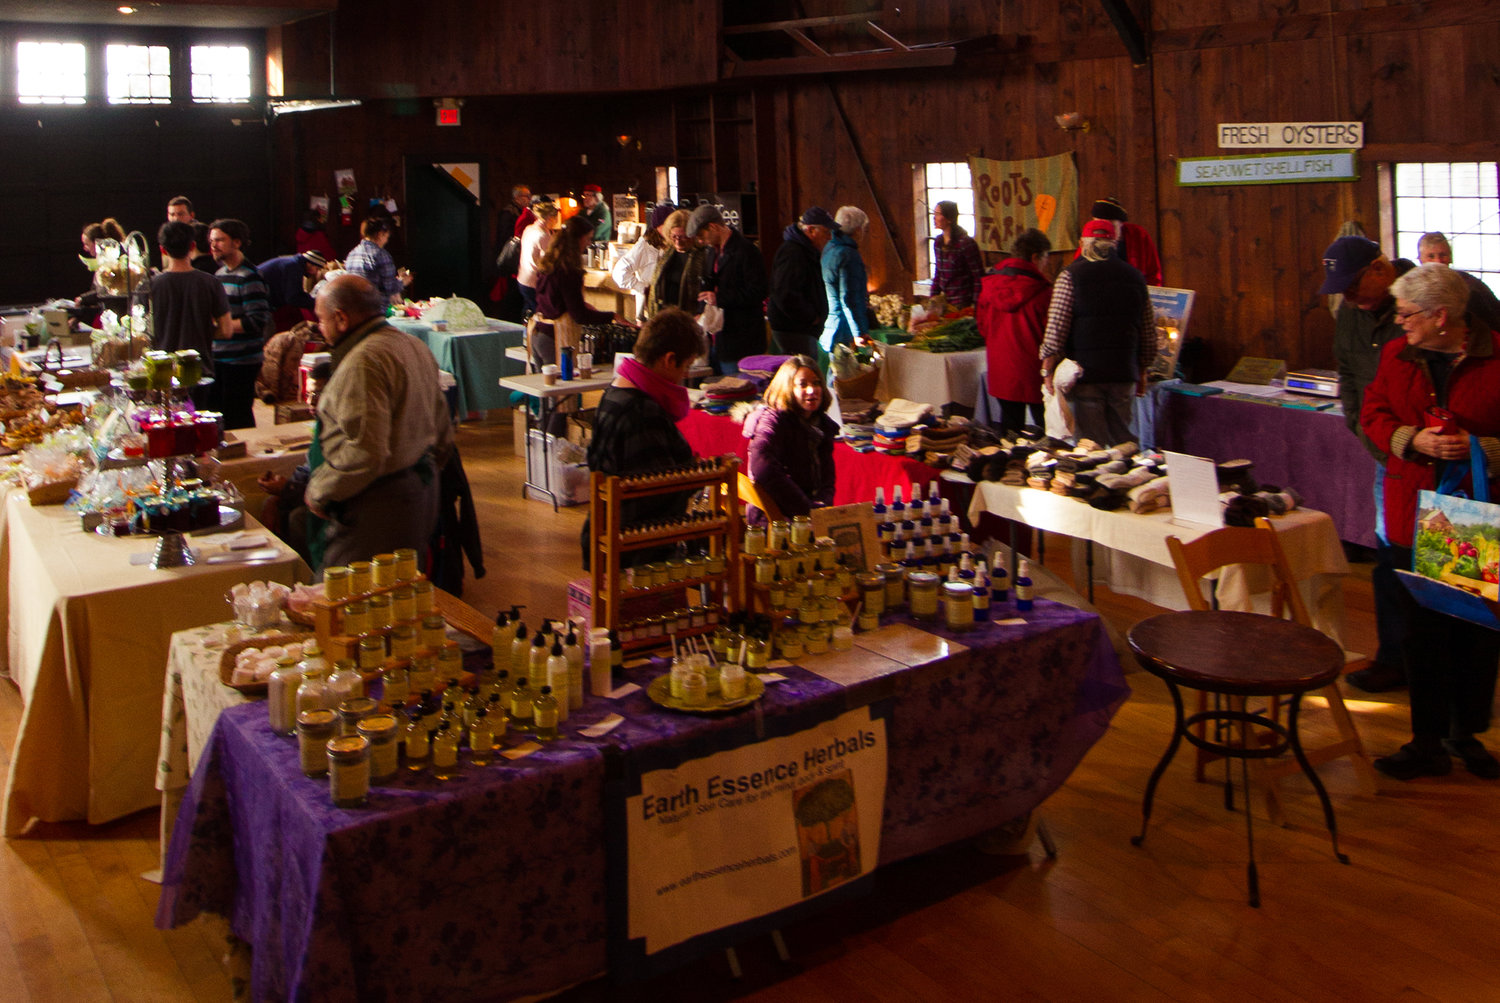 Find local goods and foods year-round at Mount Hope Farm